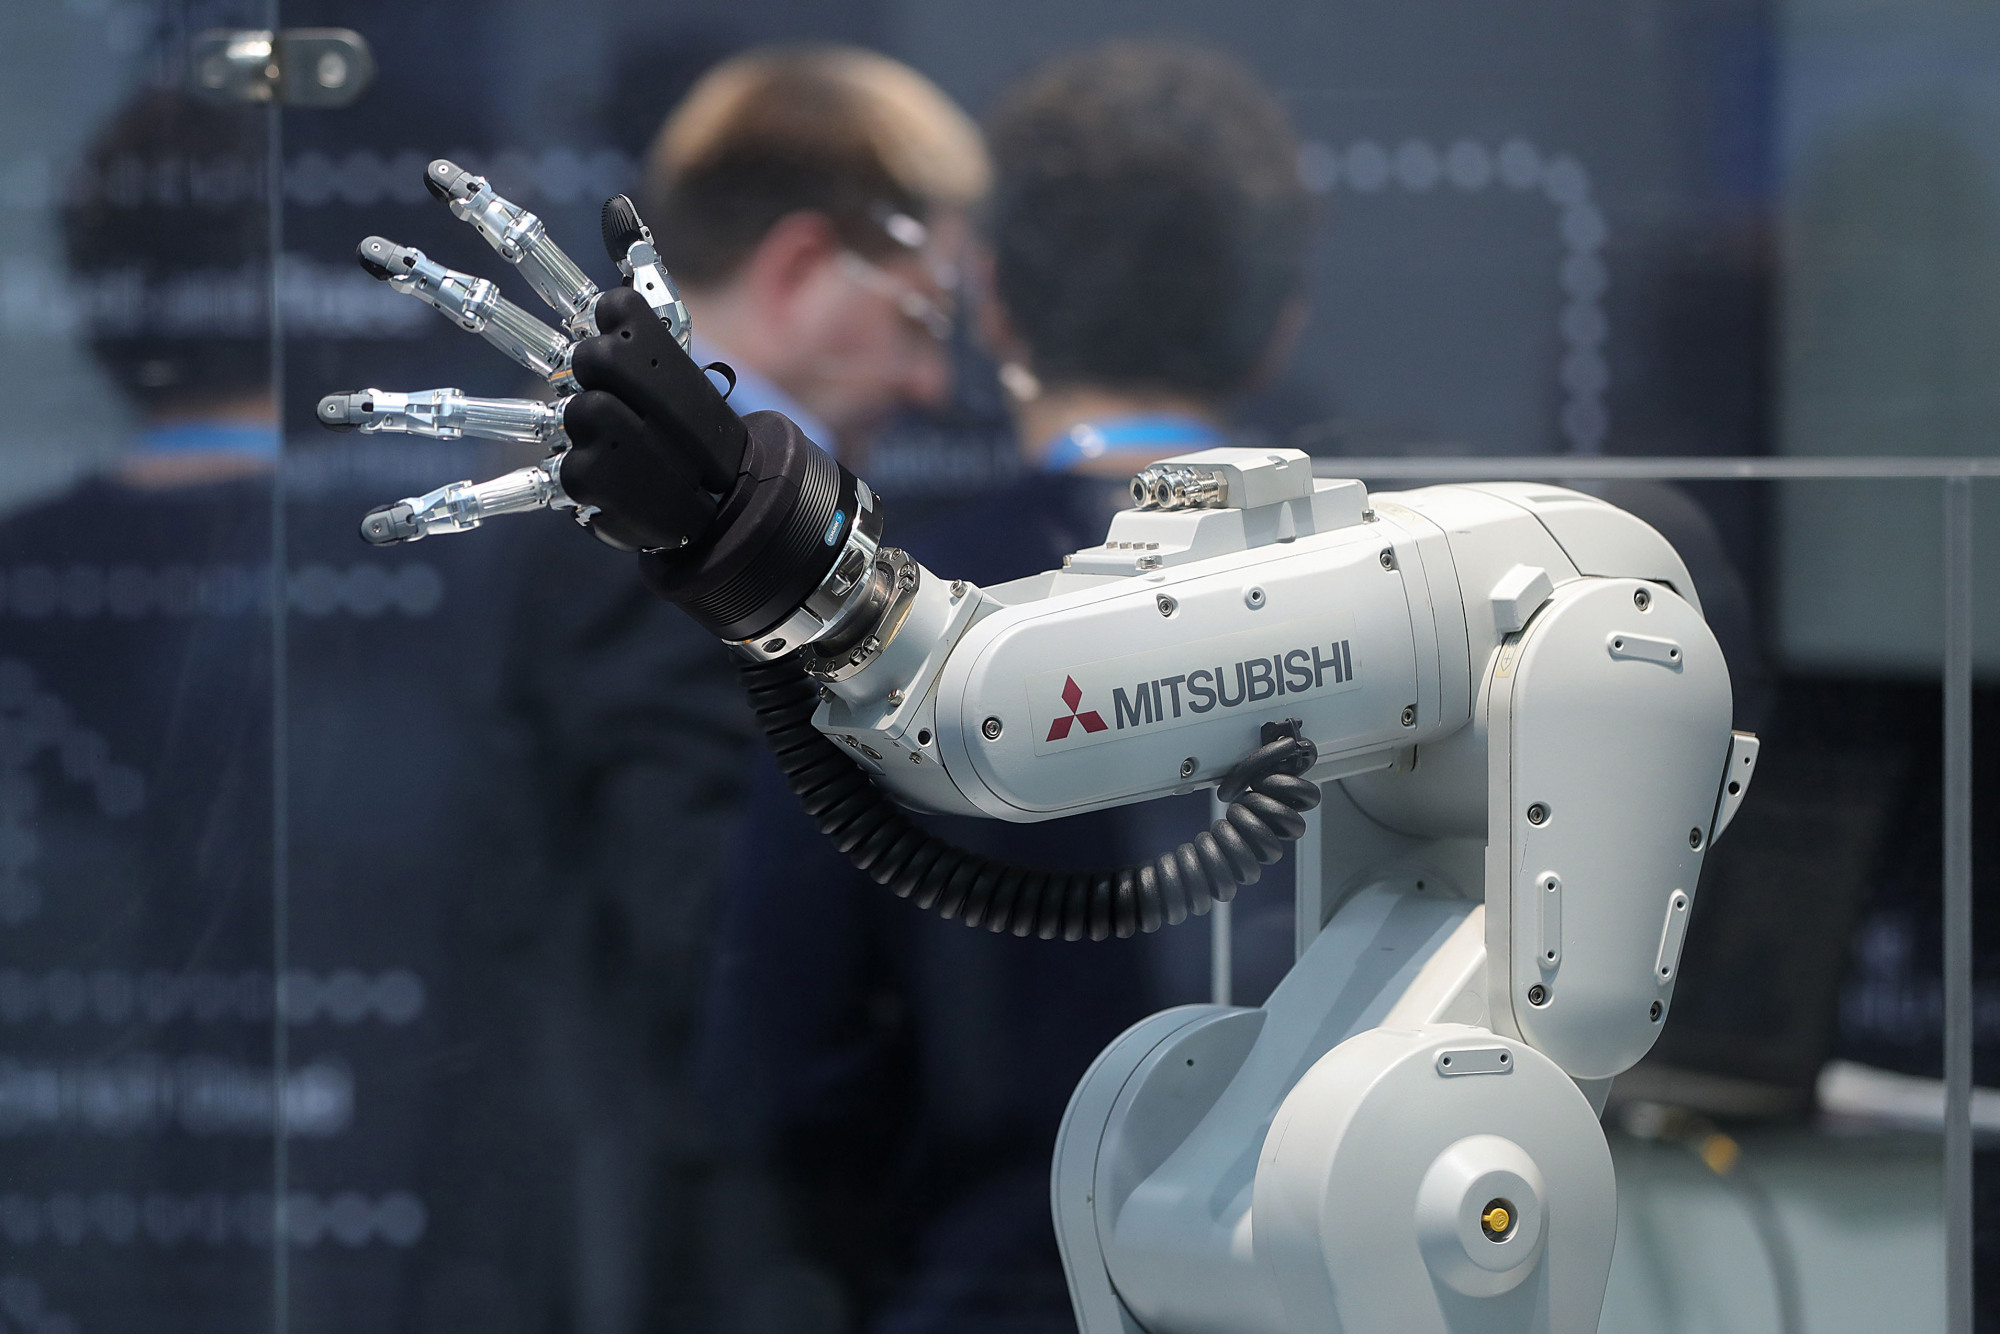 A Mitsubishi Melfa robotic arm, manufactured by Mitsubishi Electric Corp., is displayed at the Robert Bosch GmbH Internet of Things conference in Berlin in February. | BLOOMBERG